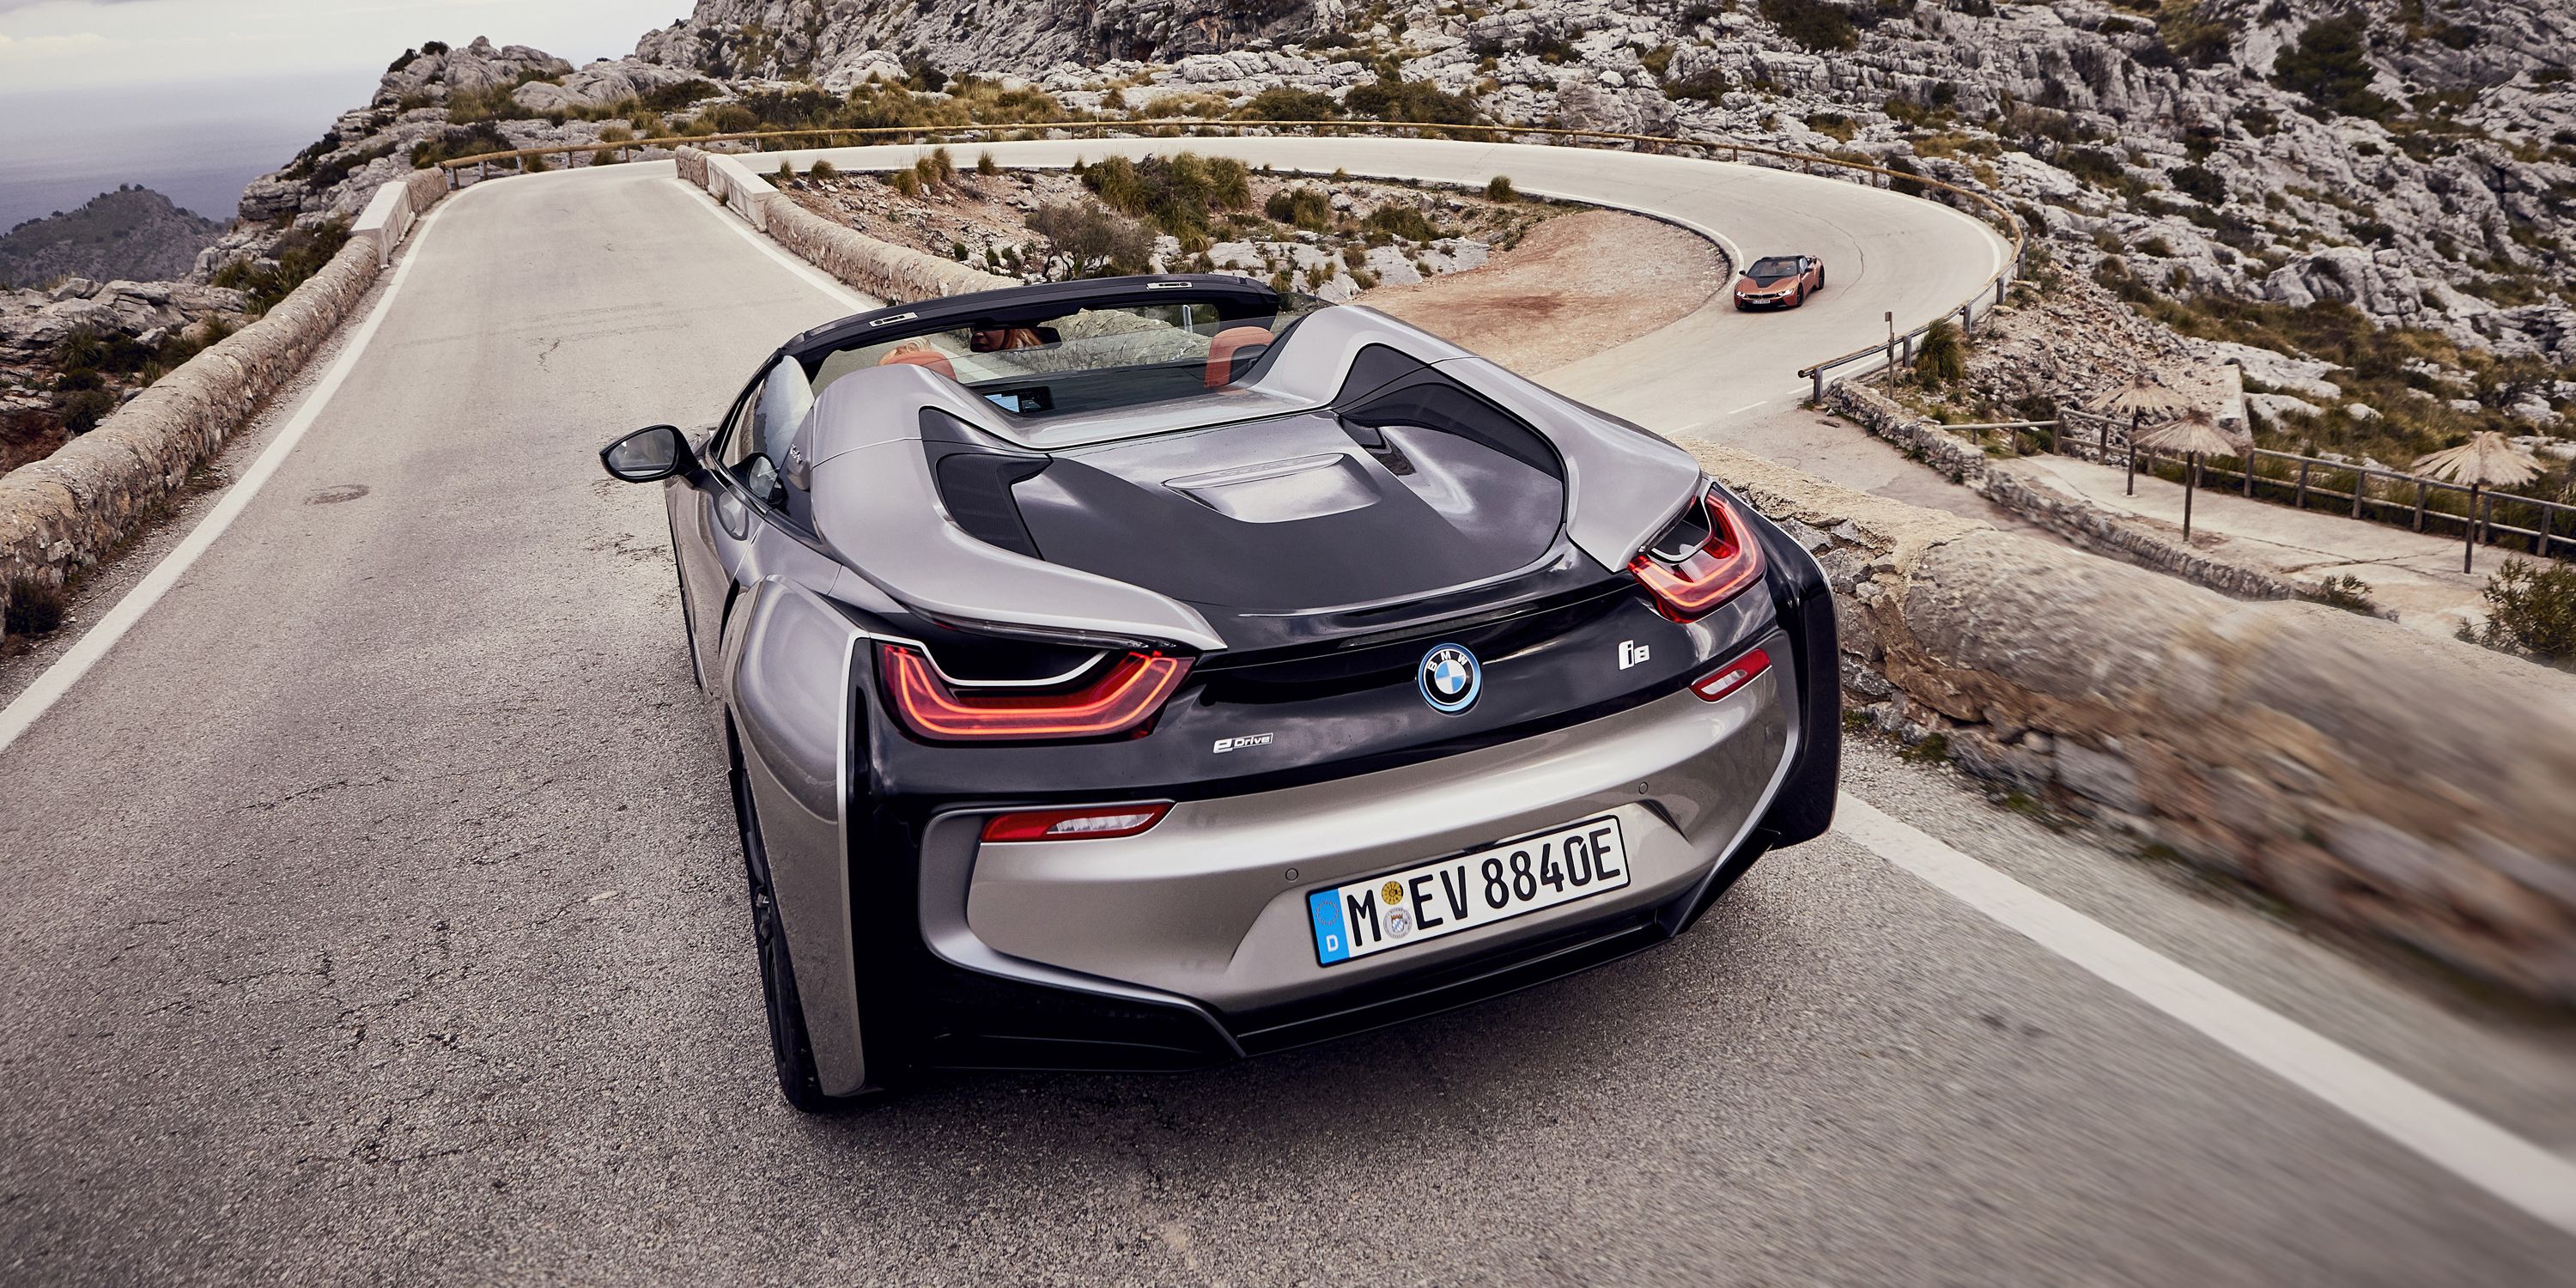 The Most Impressive Part Of The Bmw I8 Roadster Is How It'S Made